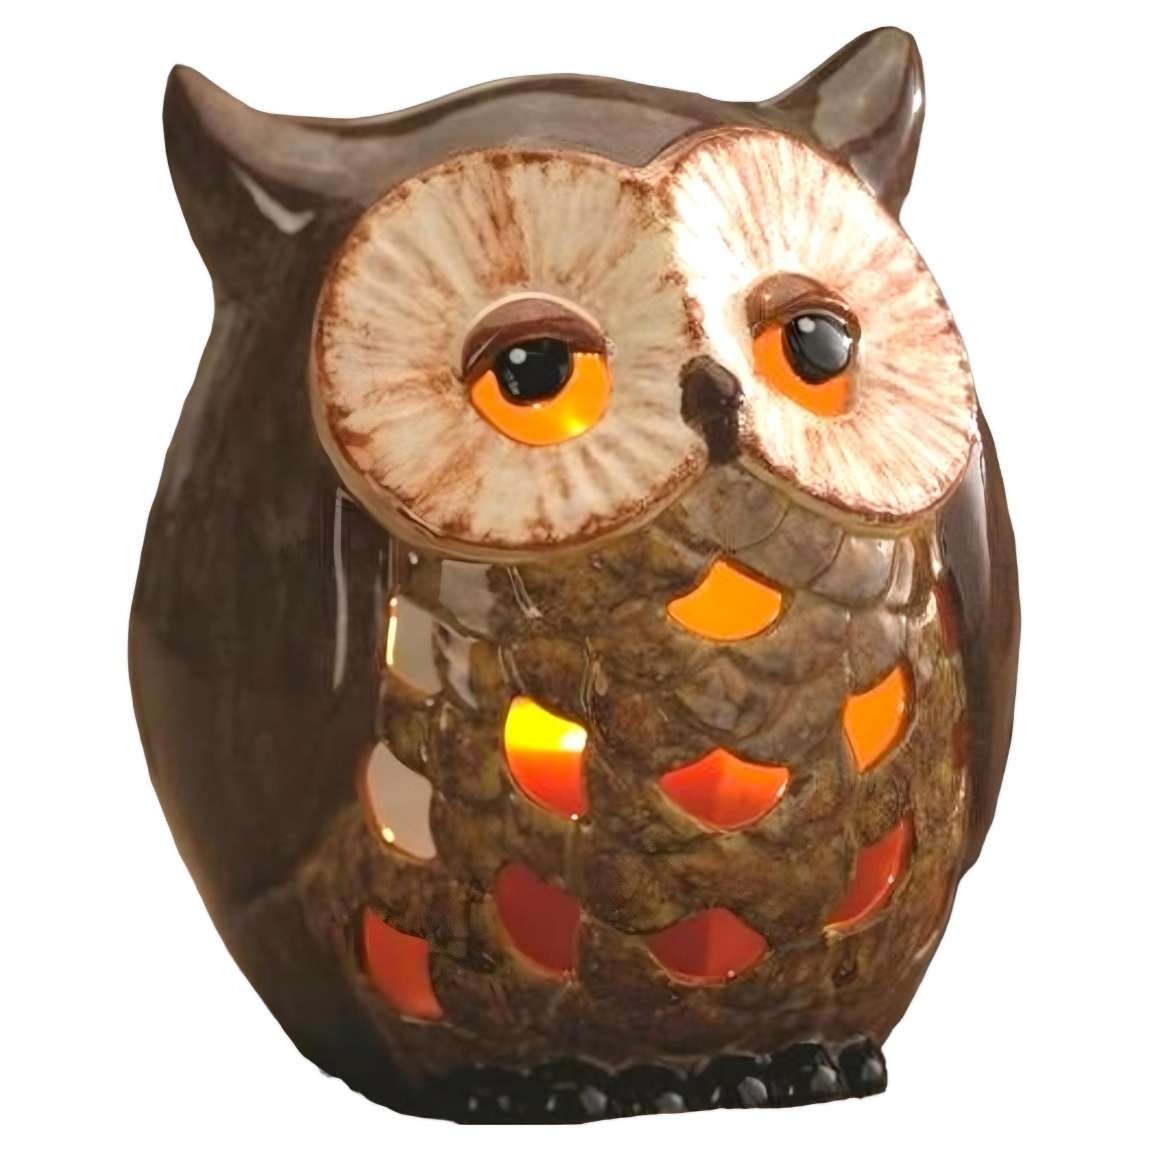 5143 Owl Lantern - Paint Your Own Pottery Ceramic Bisque Blank Lit up